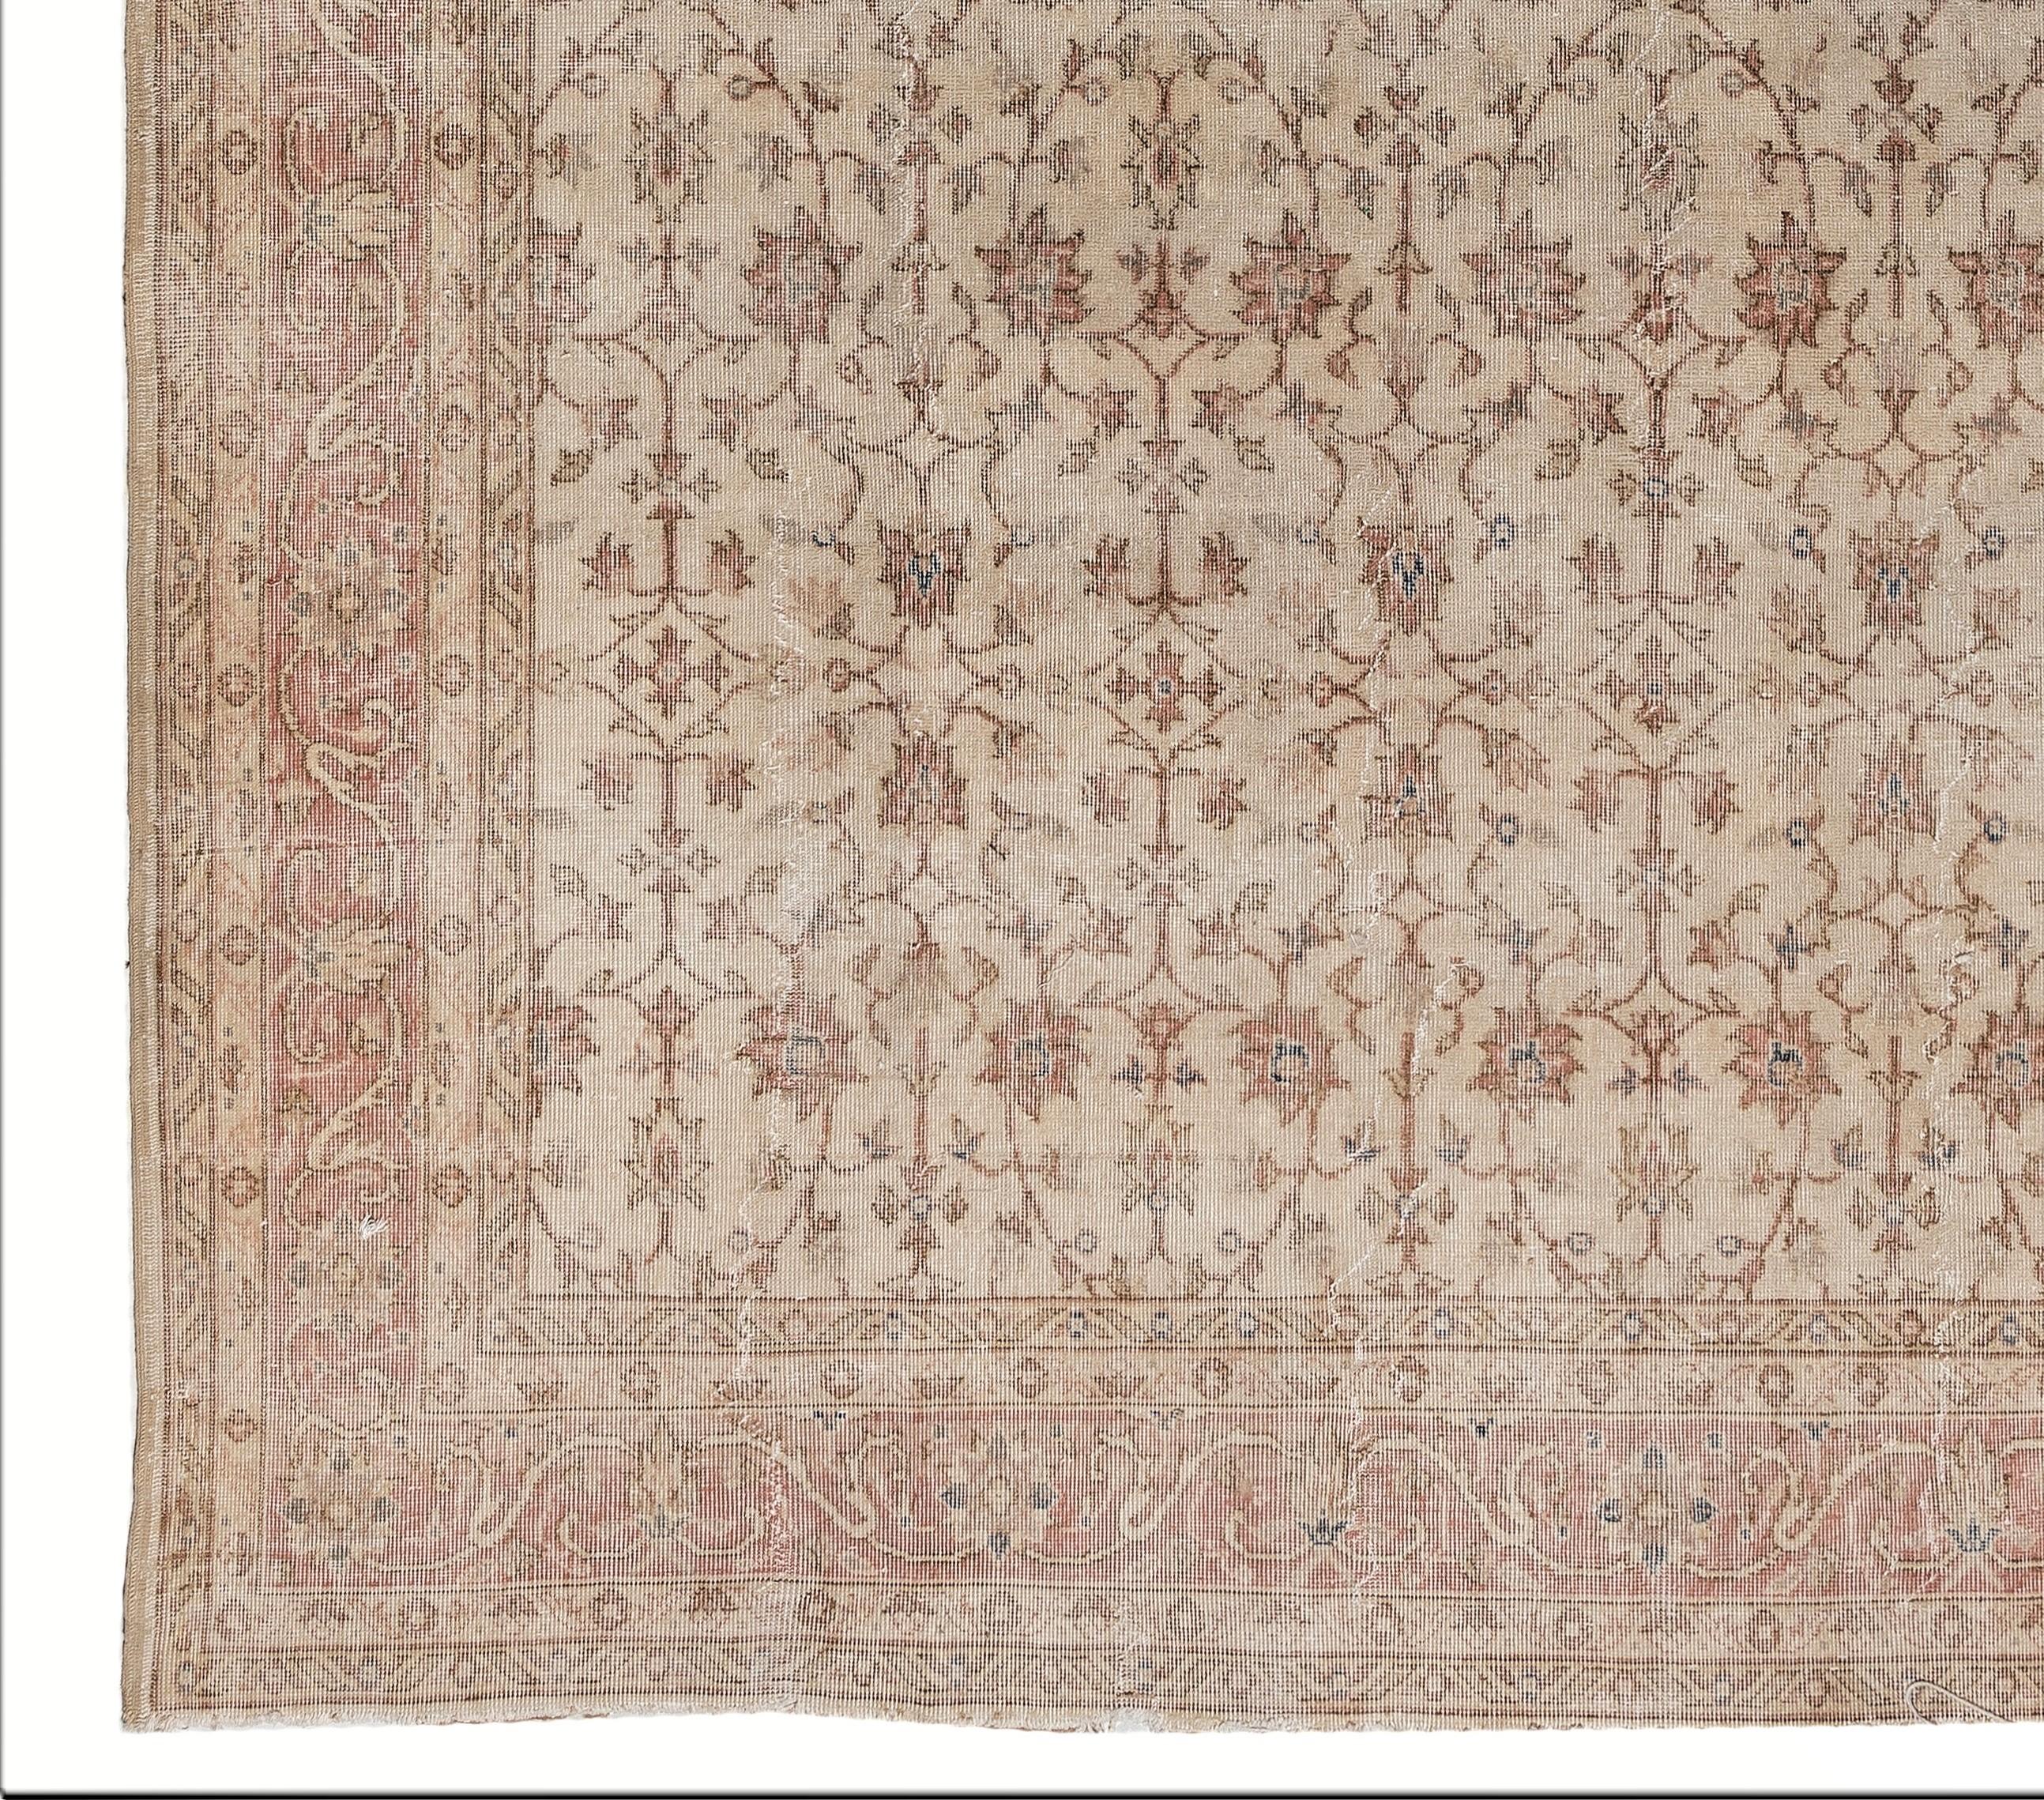 A vintage hand knotted Turkish Oushak rug in a very soft, muted palette of beige, khaki, ecru, tan, fawn a. The rug features two floral medallions at both ends of the field that is filled with symmetrically placed floral vines centered around large